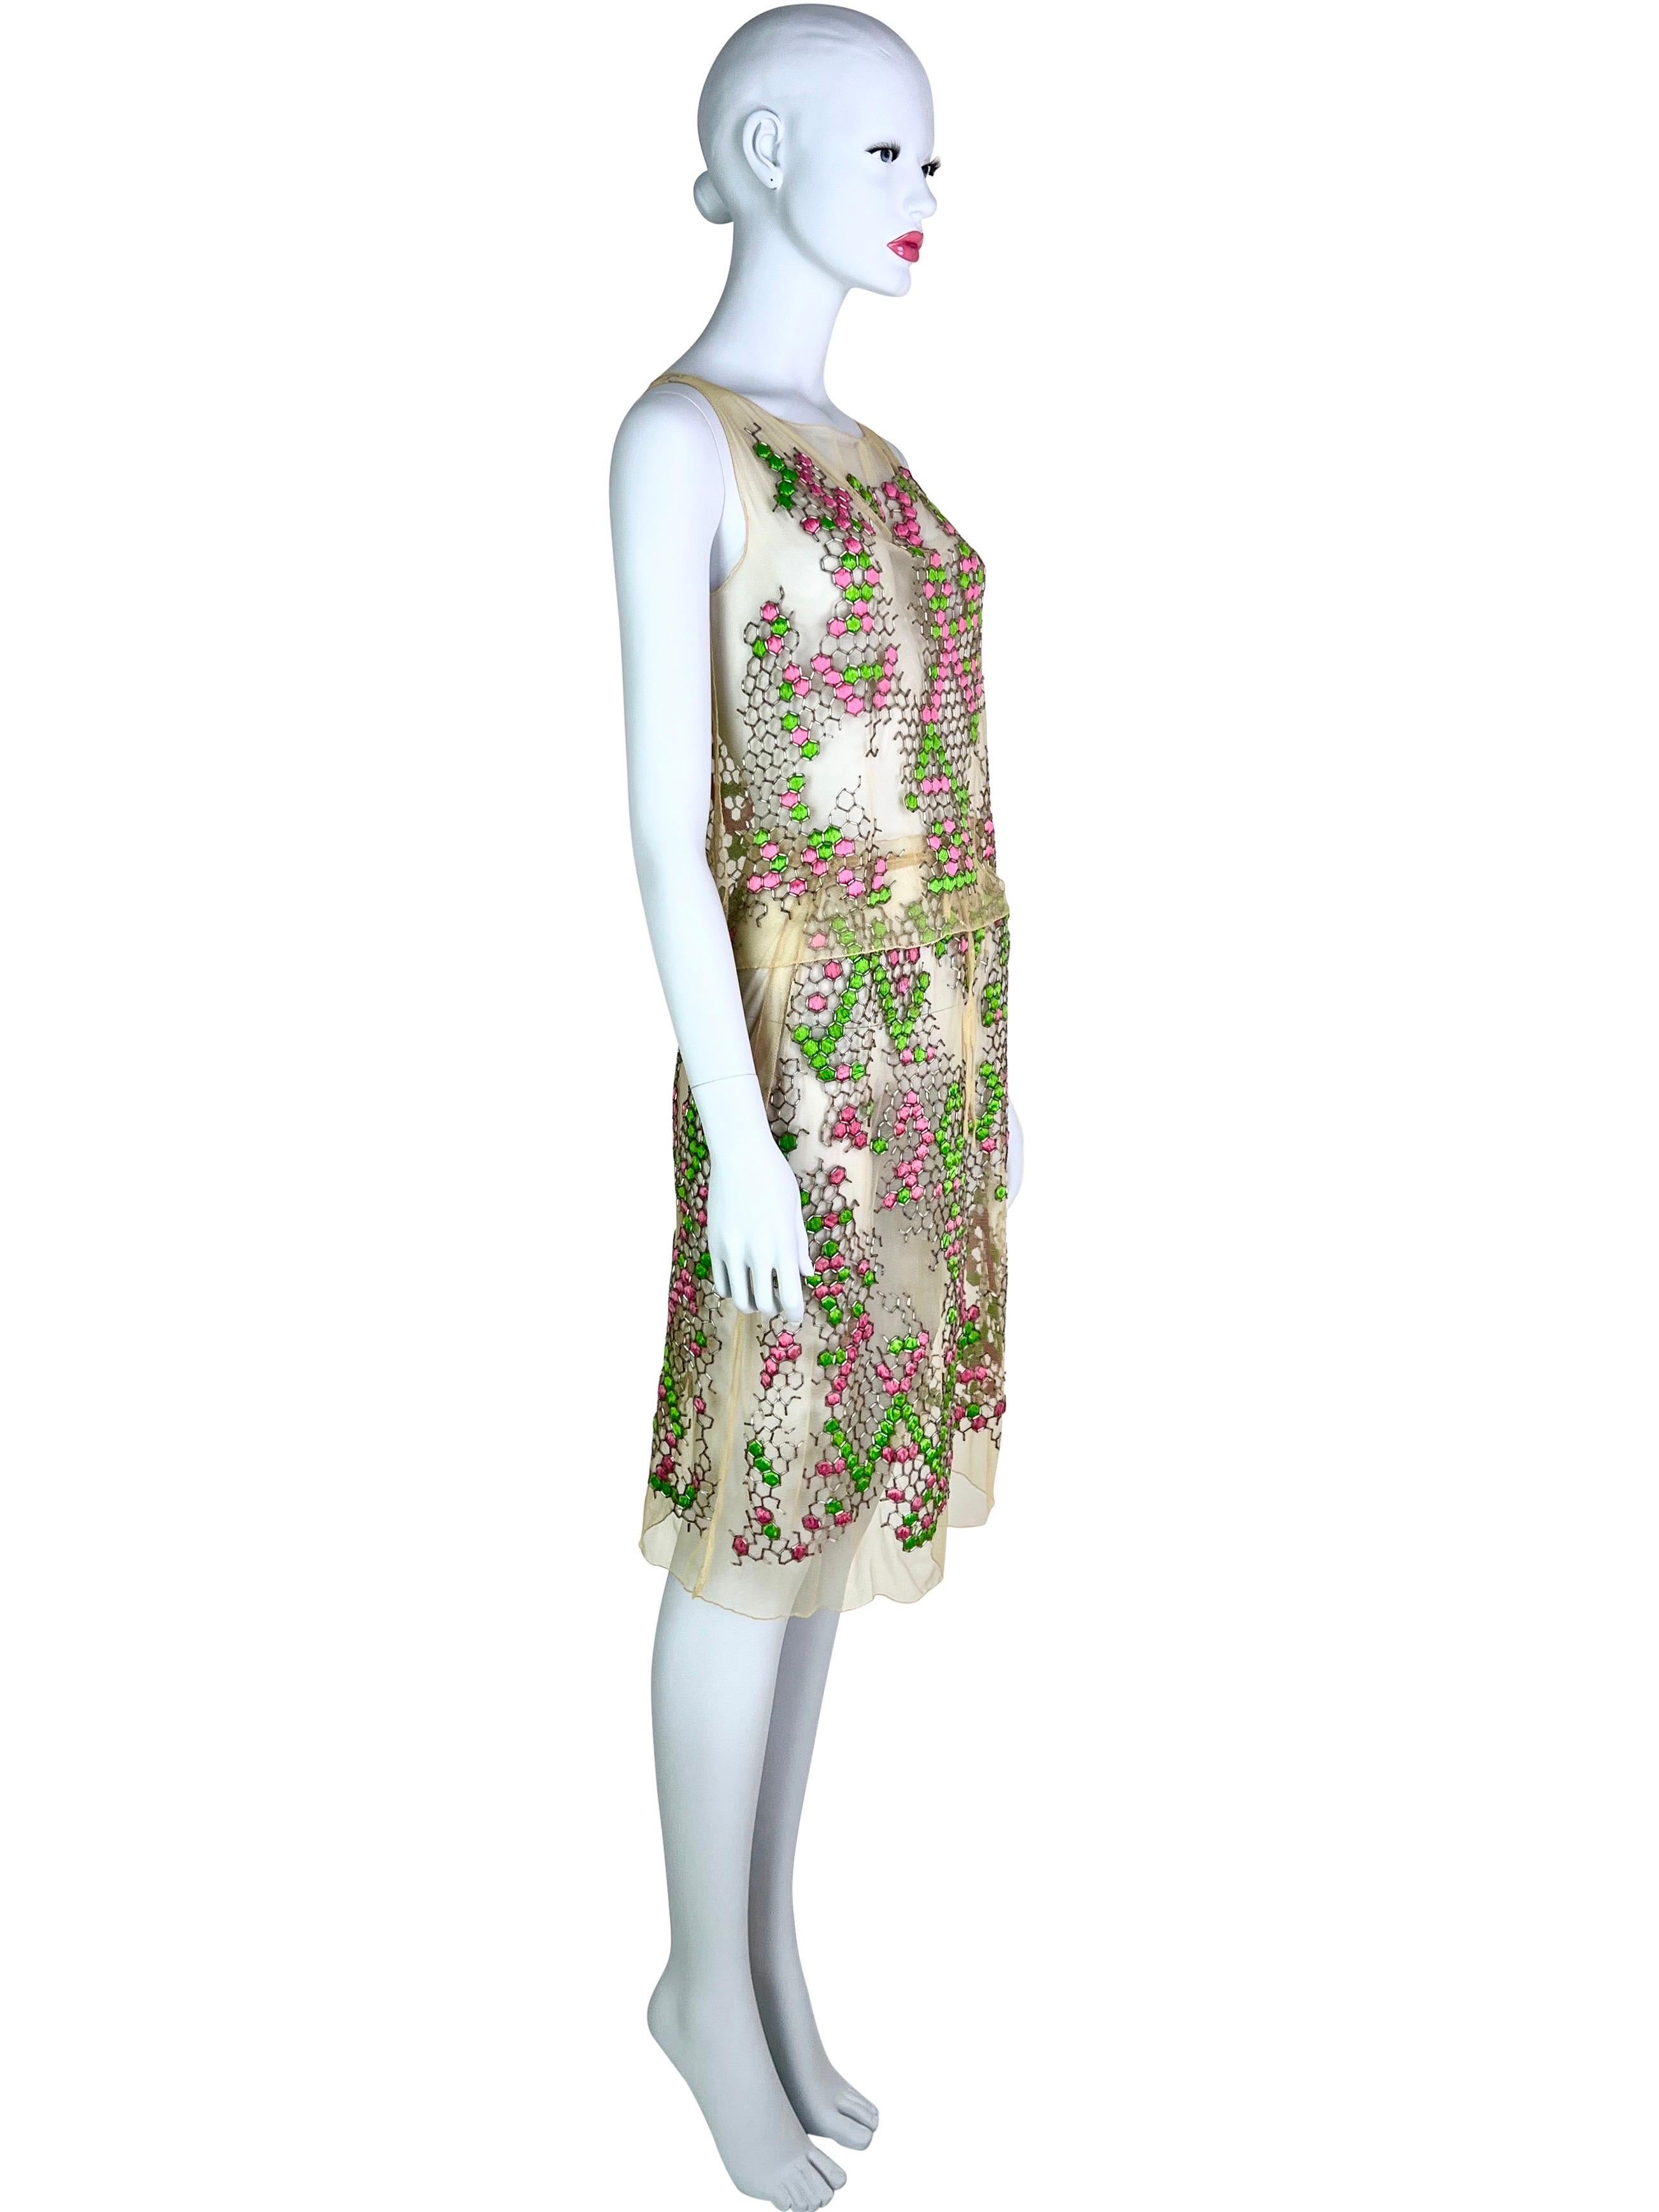 Women's Spring 2000 Fendi by Karl Lagerfeld Embroidered Mesh Set For Sale